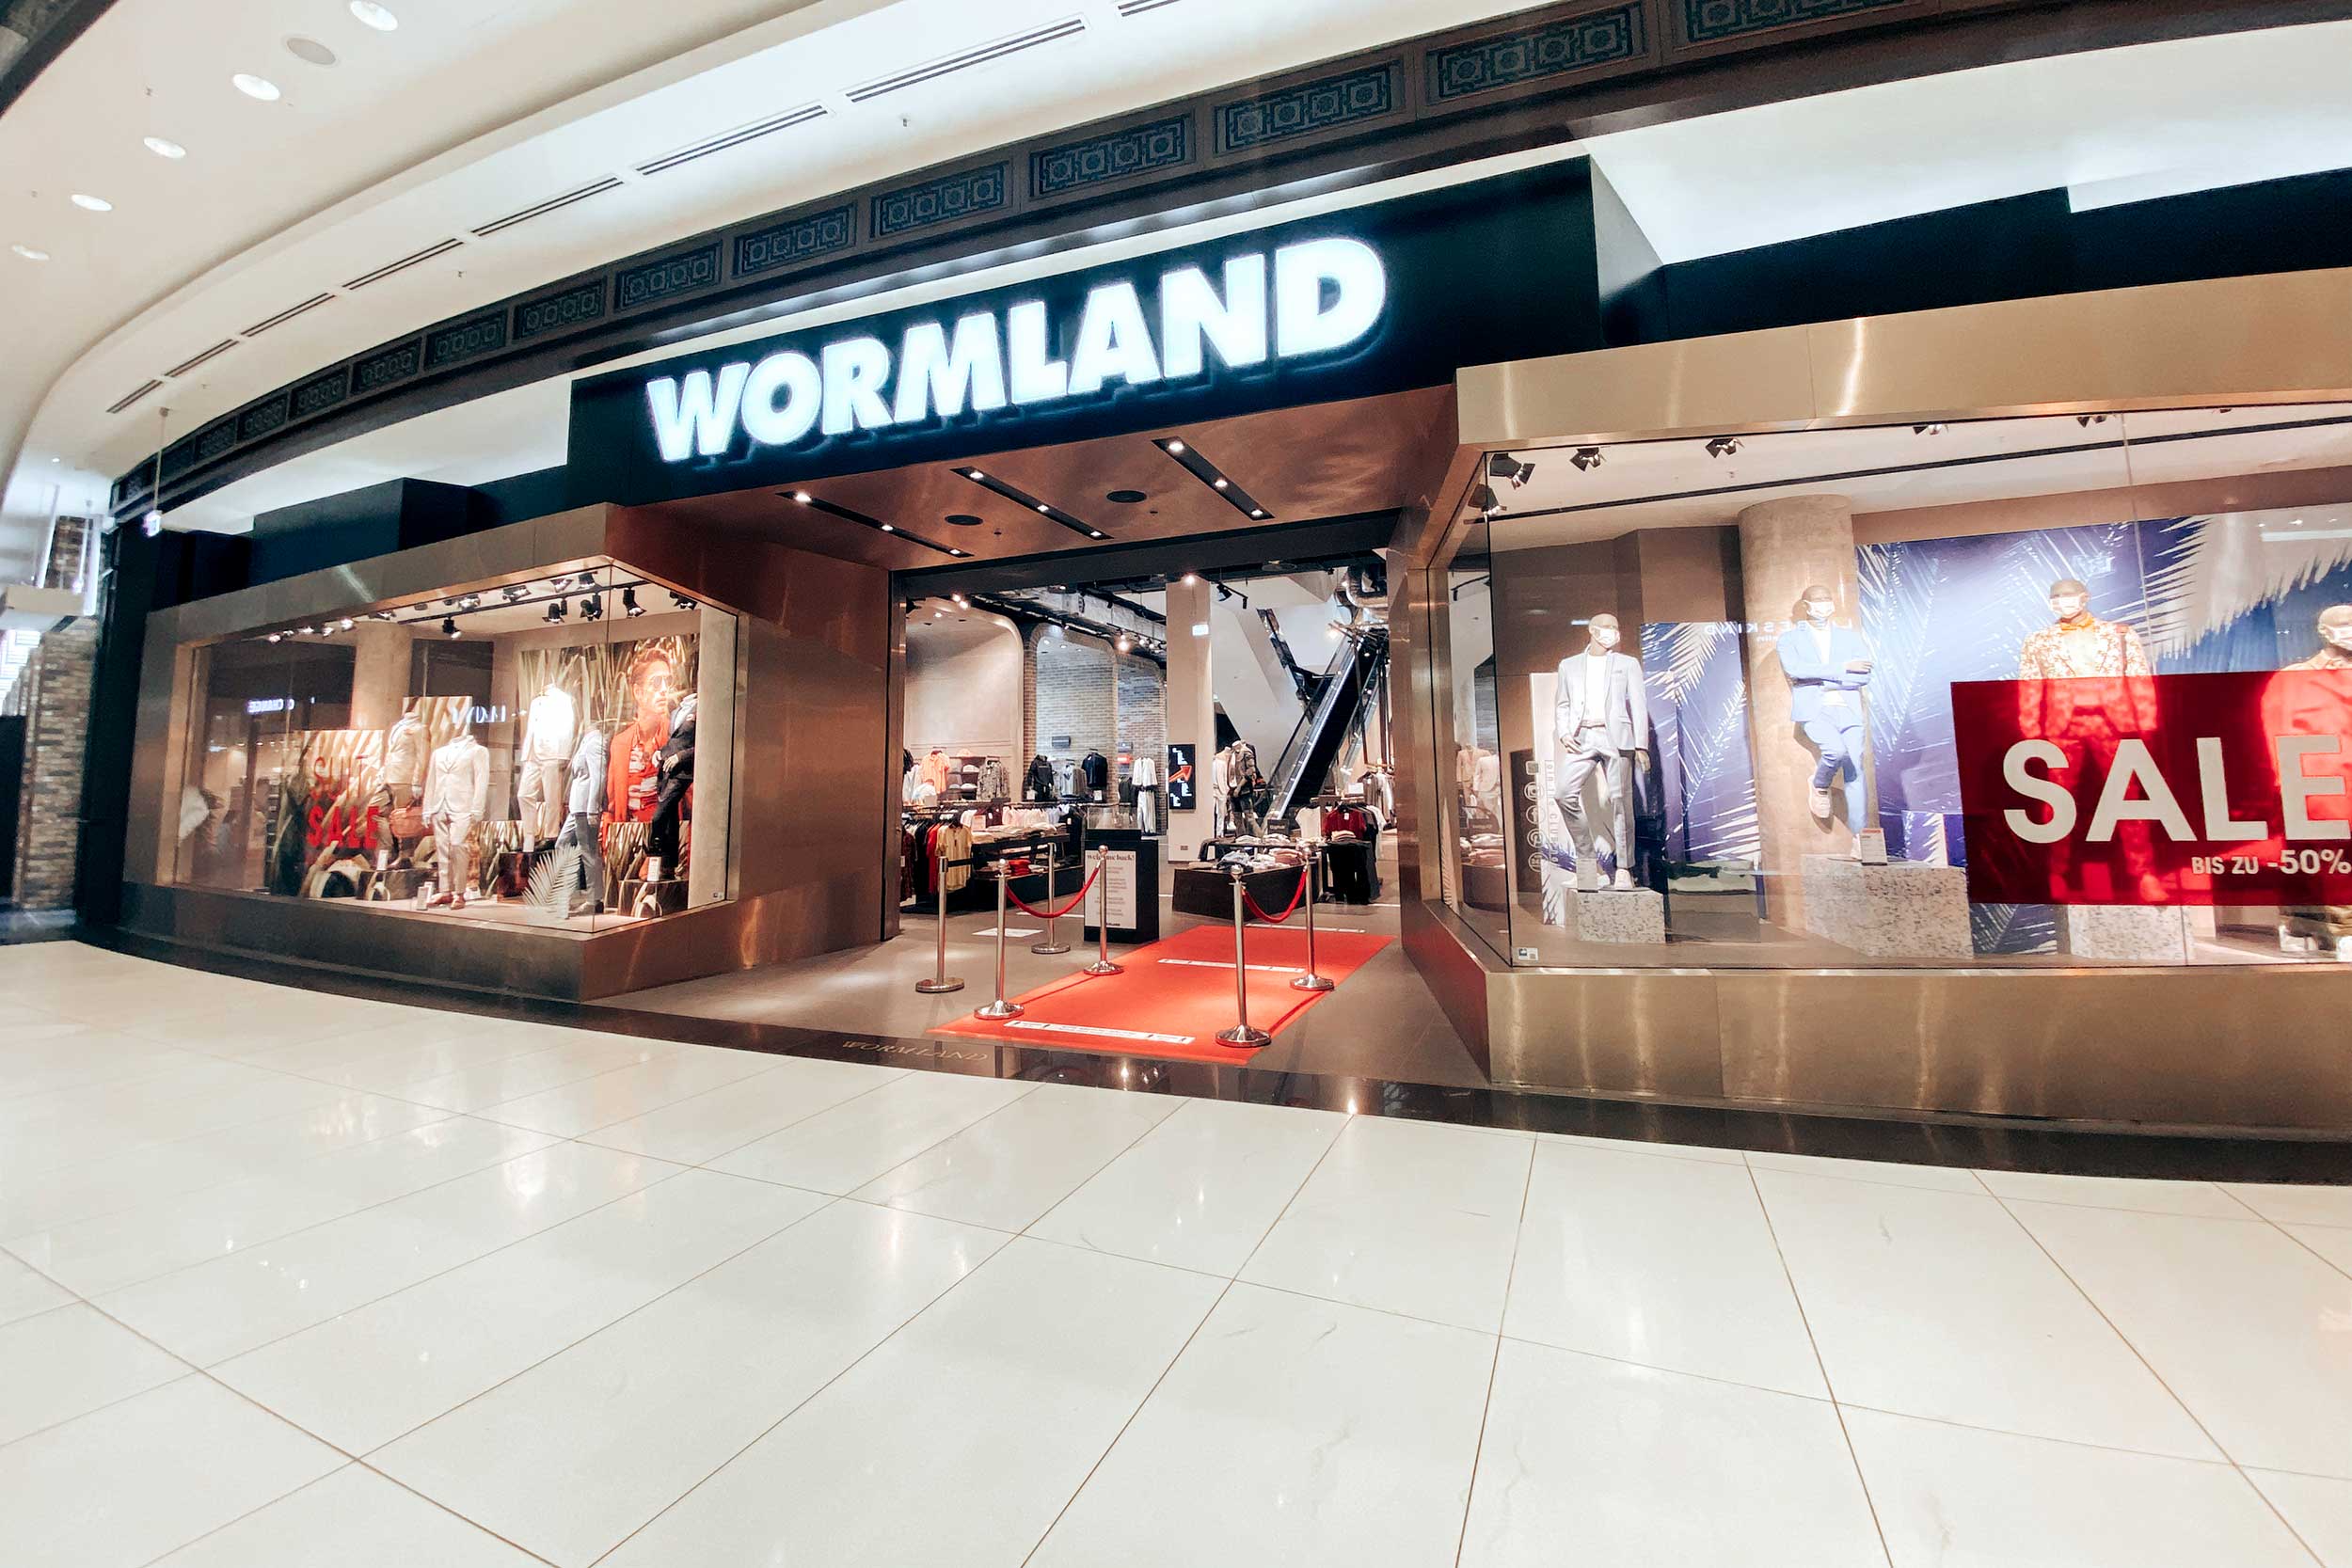 Wormland at the Mall of Berlin